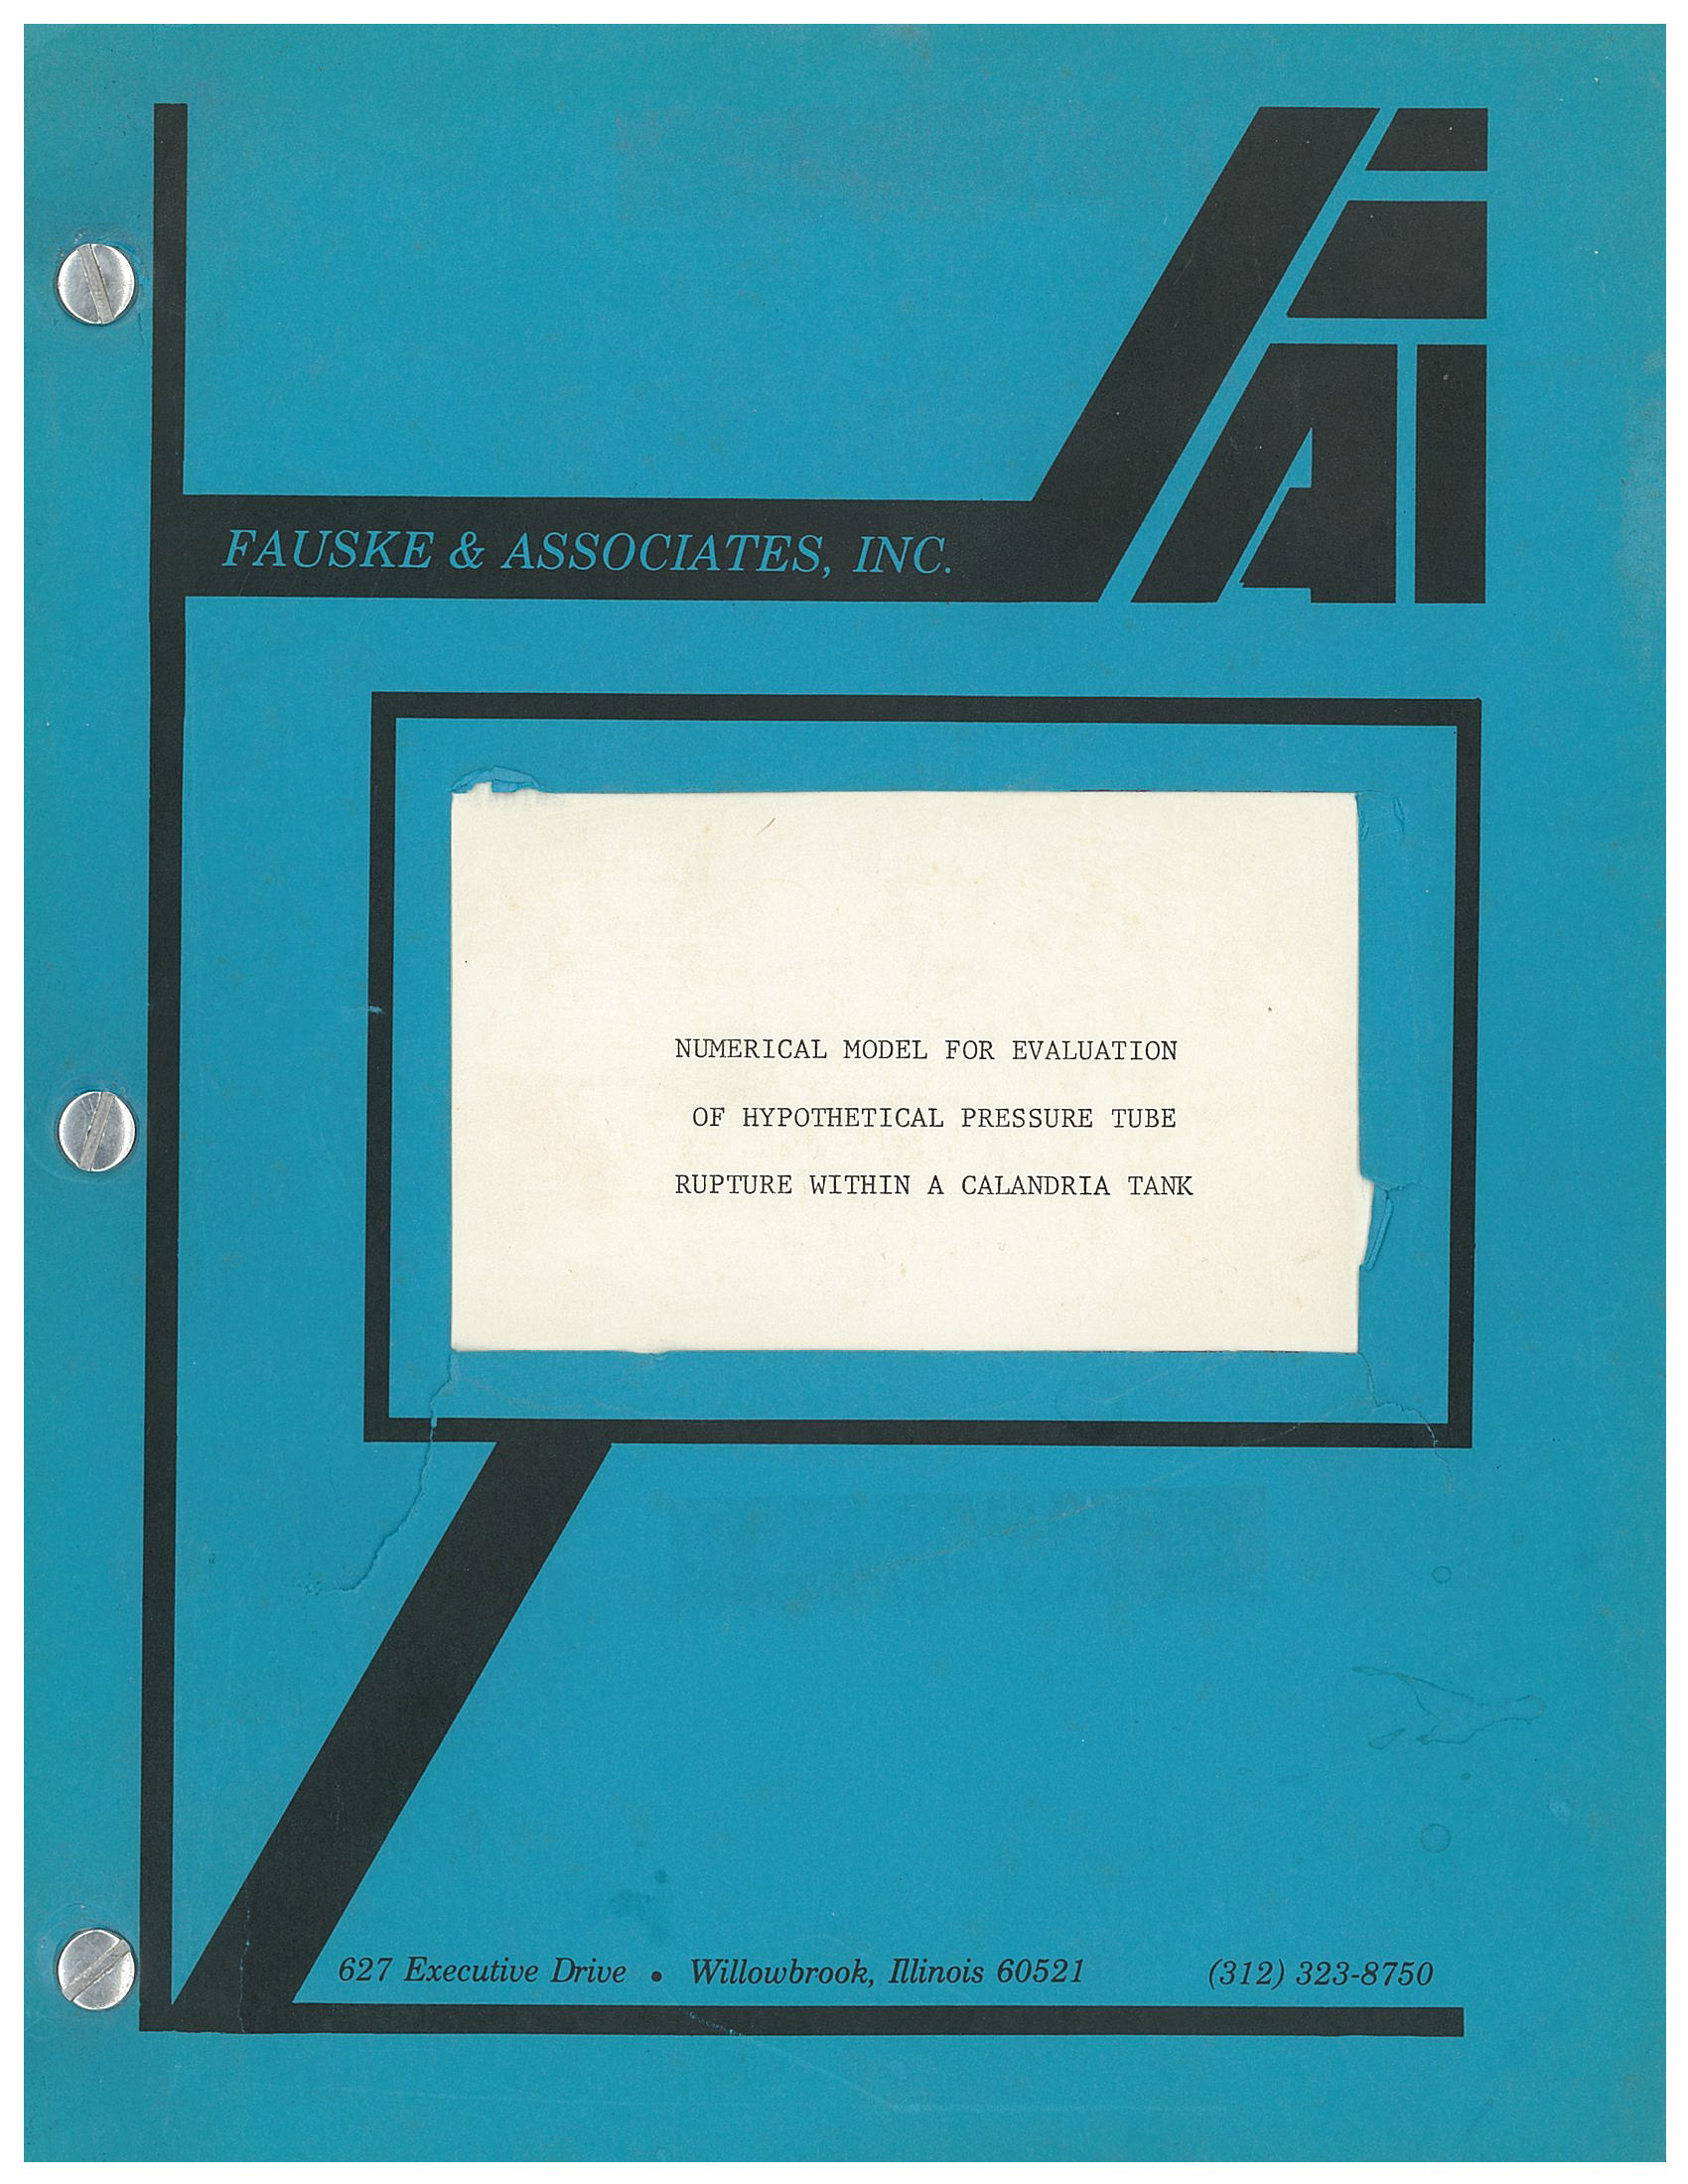 1981 report cover